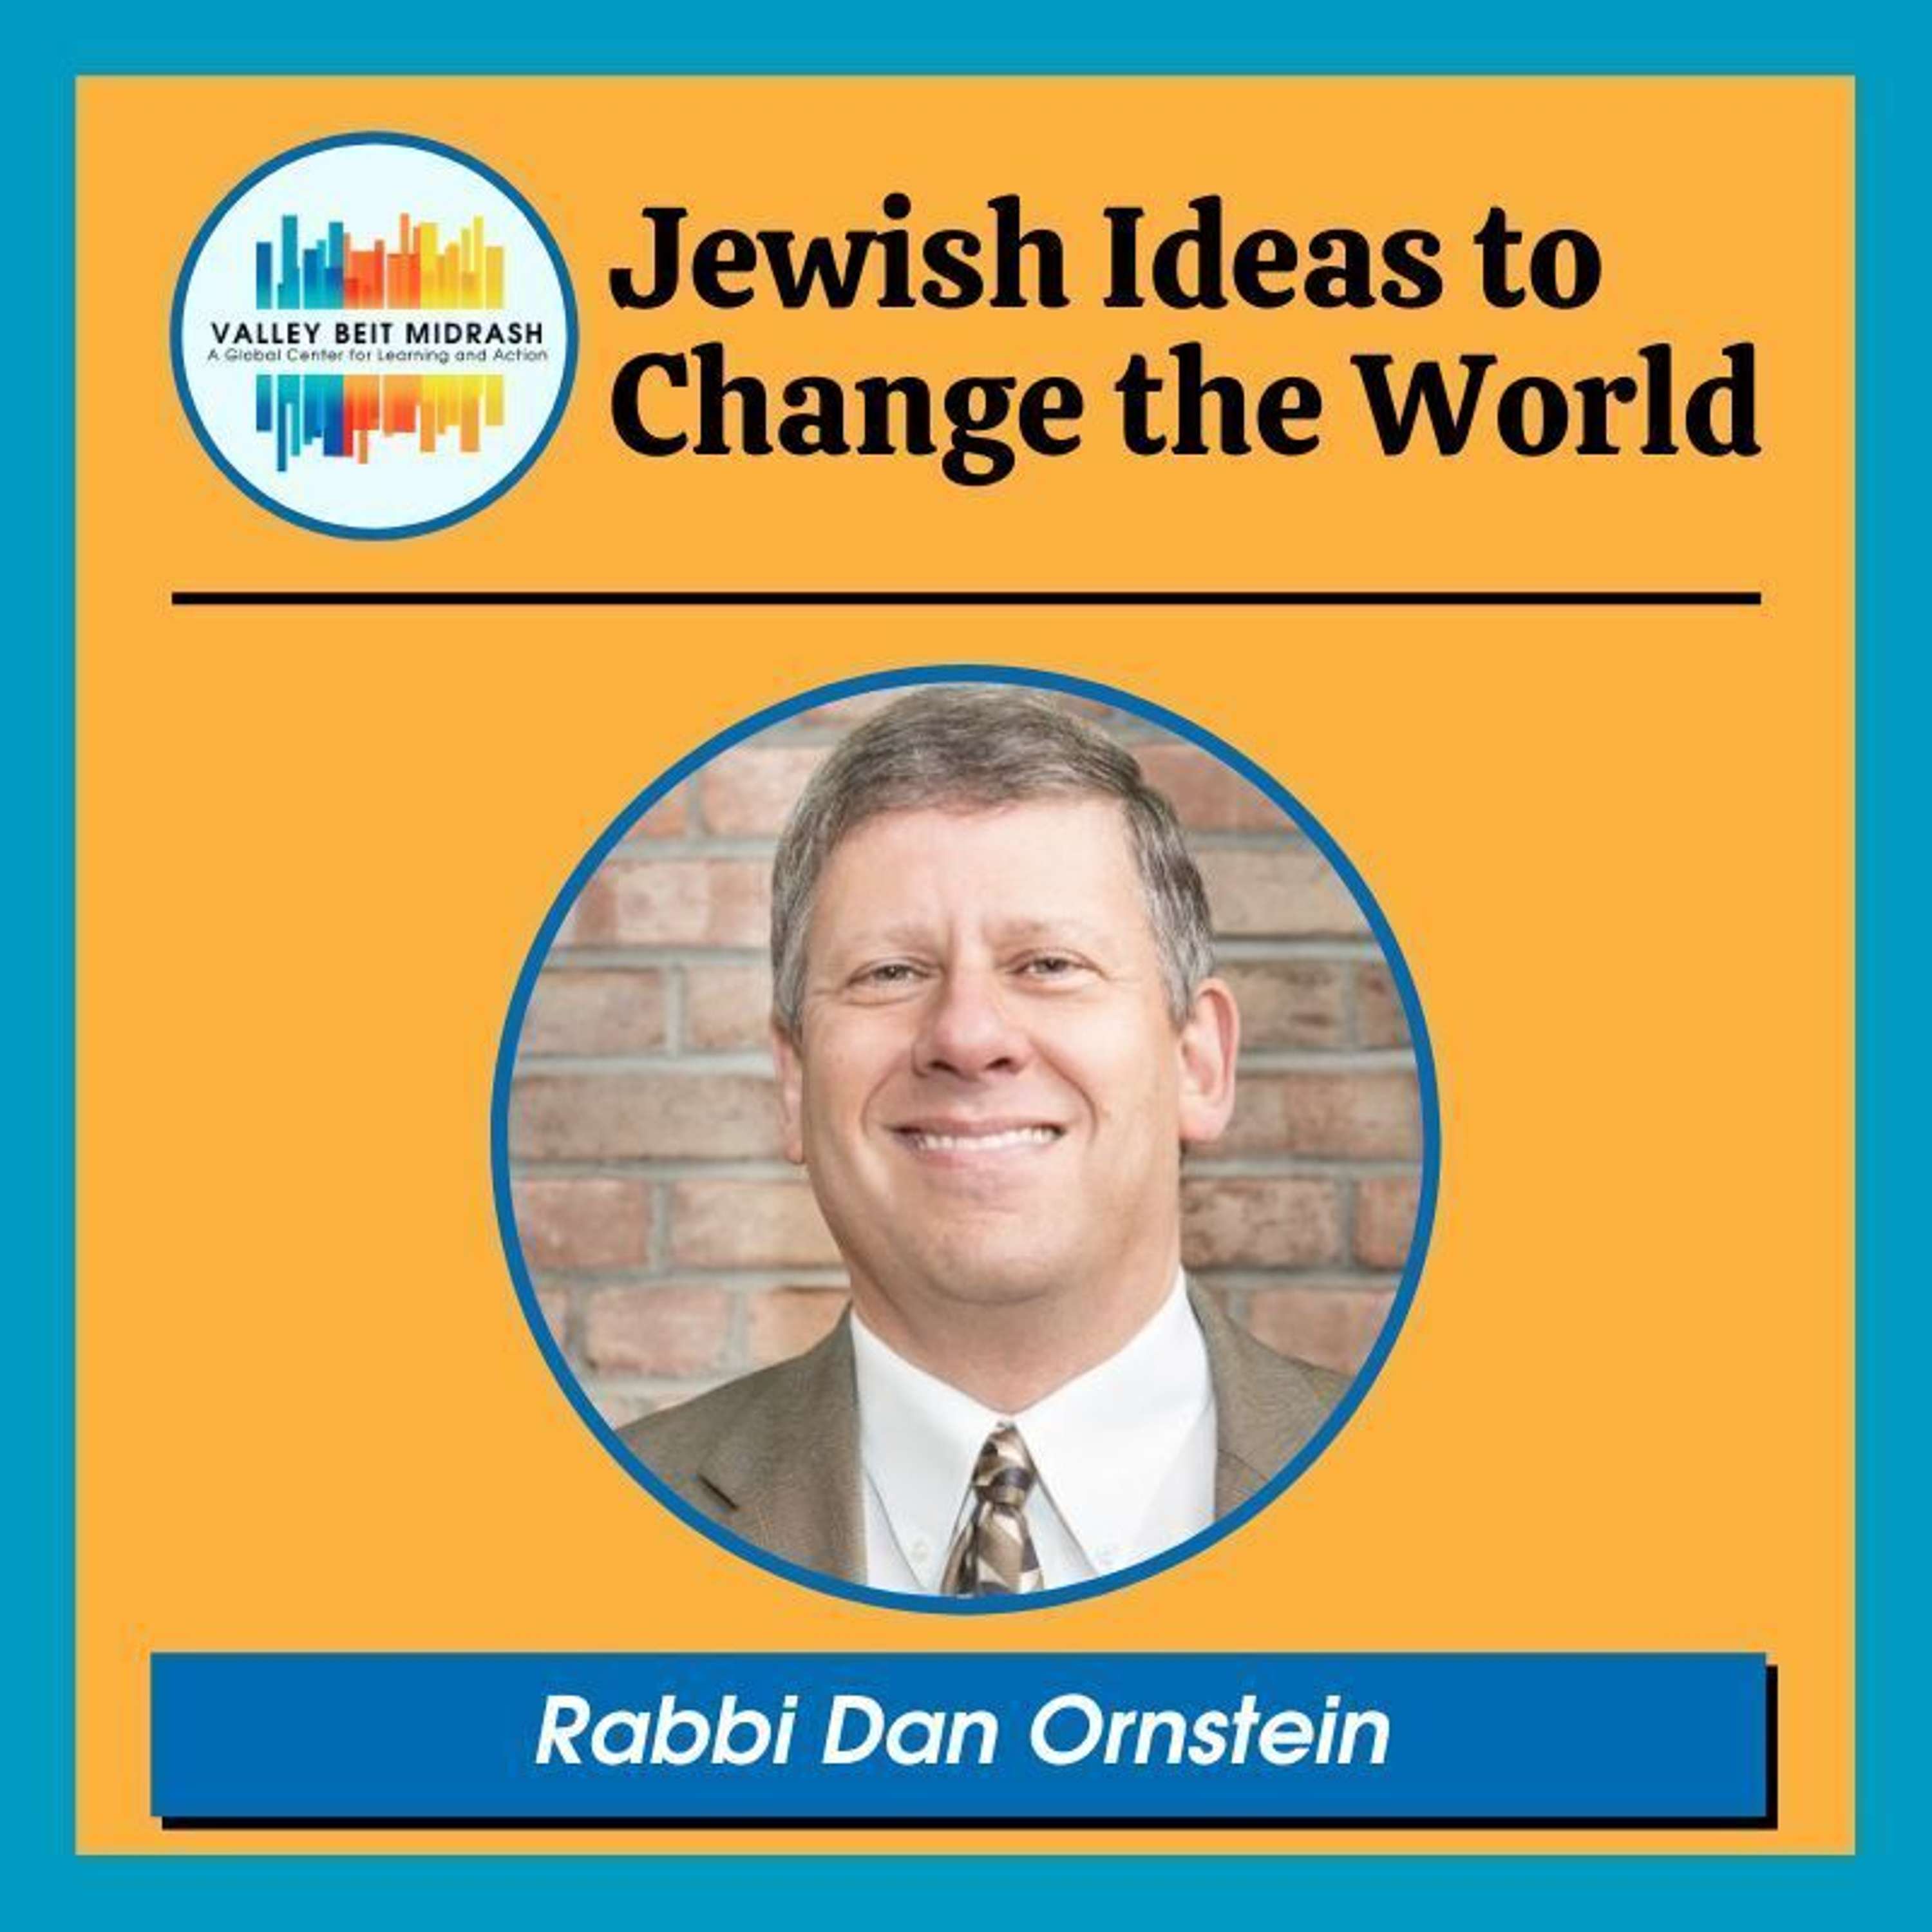 Cain and Abel’s Day In Court: What The World’s First Murder Can Teach Us About Dispensing Justice And Injustice – Rabbi Dan Ornstein